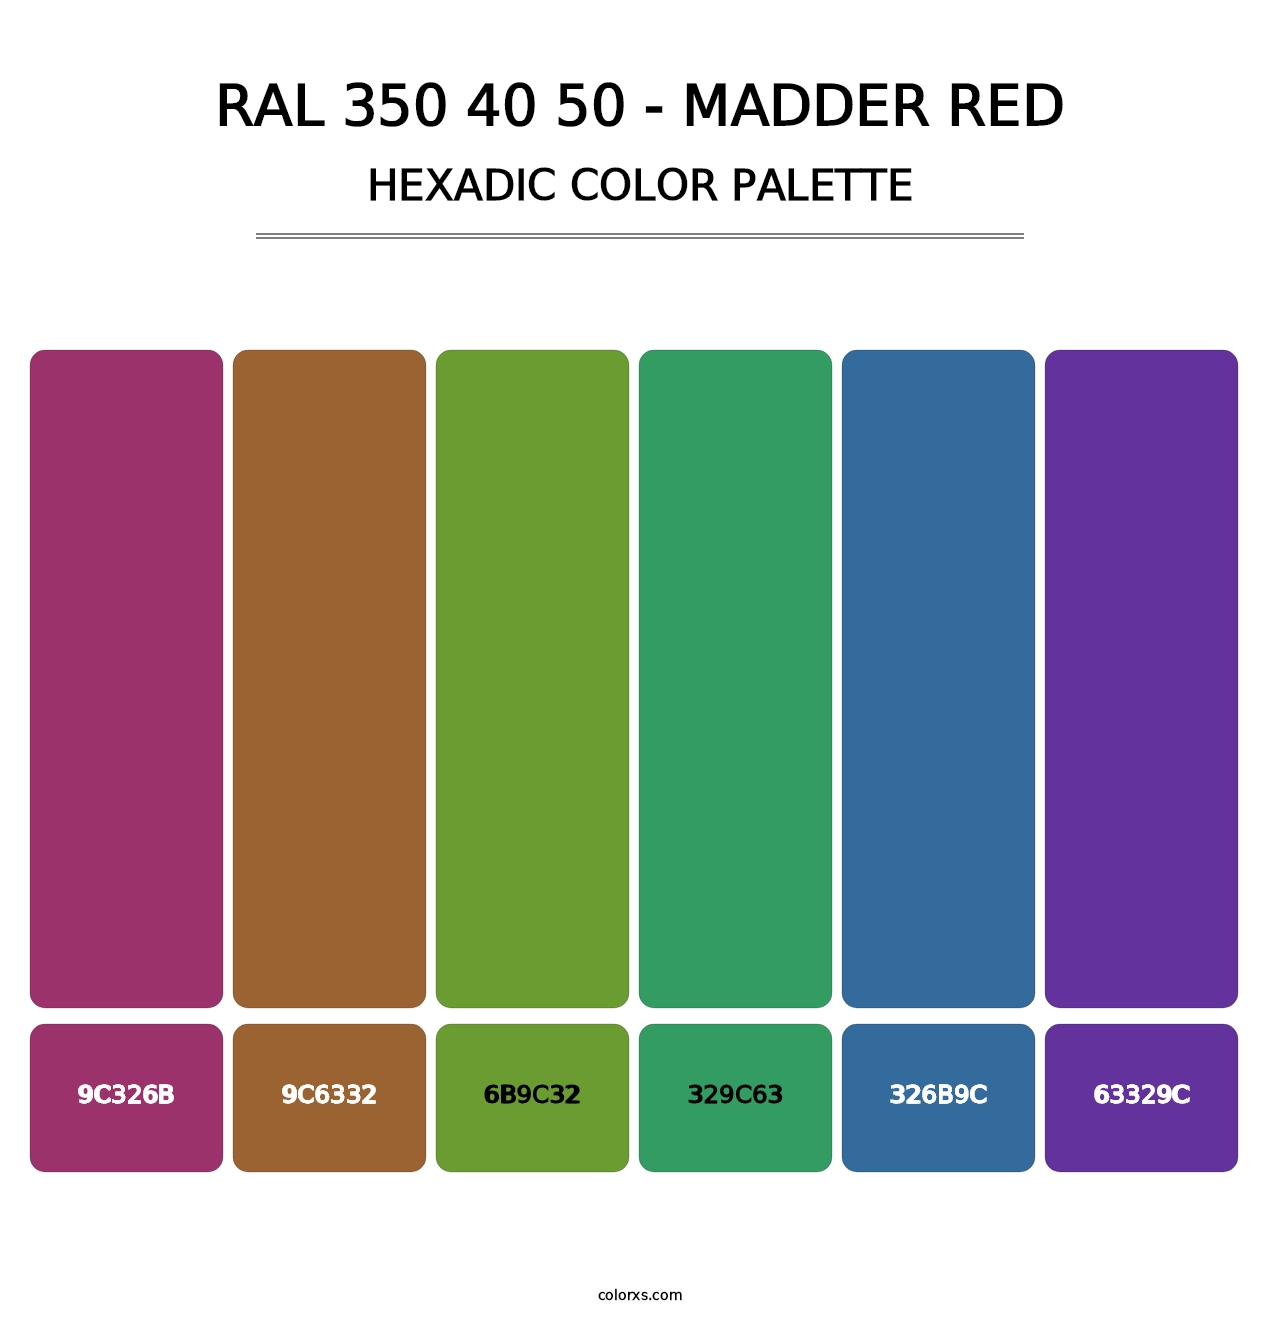 RAL 350 40 50 - Madder Red - Hexadic Color Palette